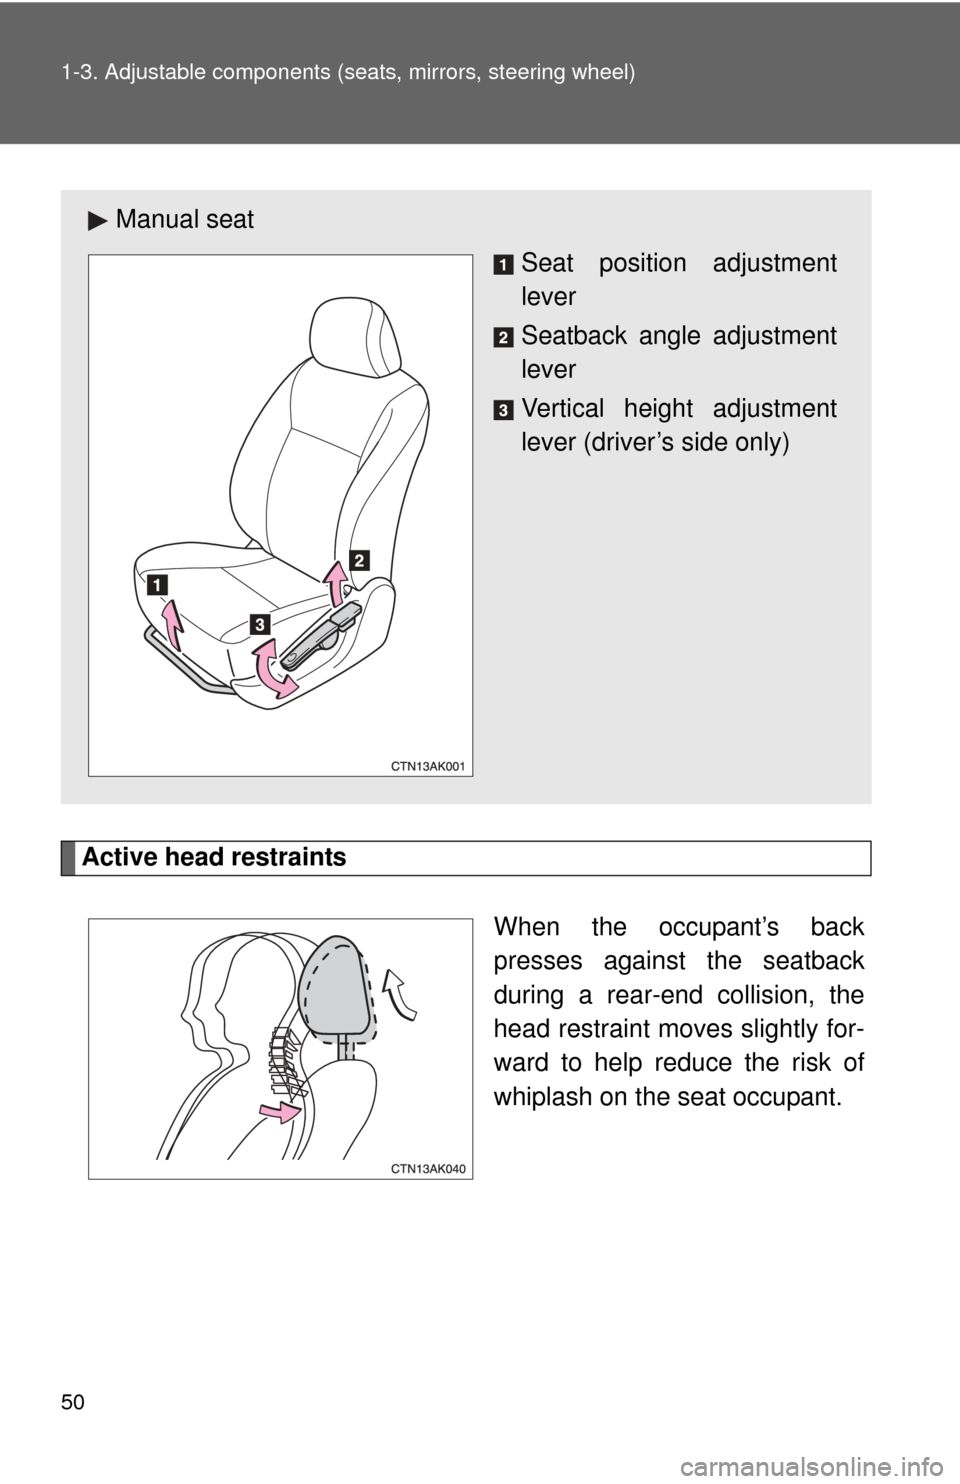 TOYOTA COROLLA 2011 10.G Service Manual 50 1-3. Adjustable components (seats, mirrors, steering wheel)
Active head restraints
When the occupant’s back
presses against the seatback
during a rear-end collision, the
head restraint moves slig